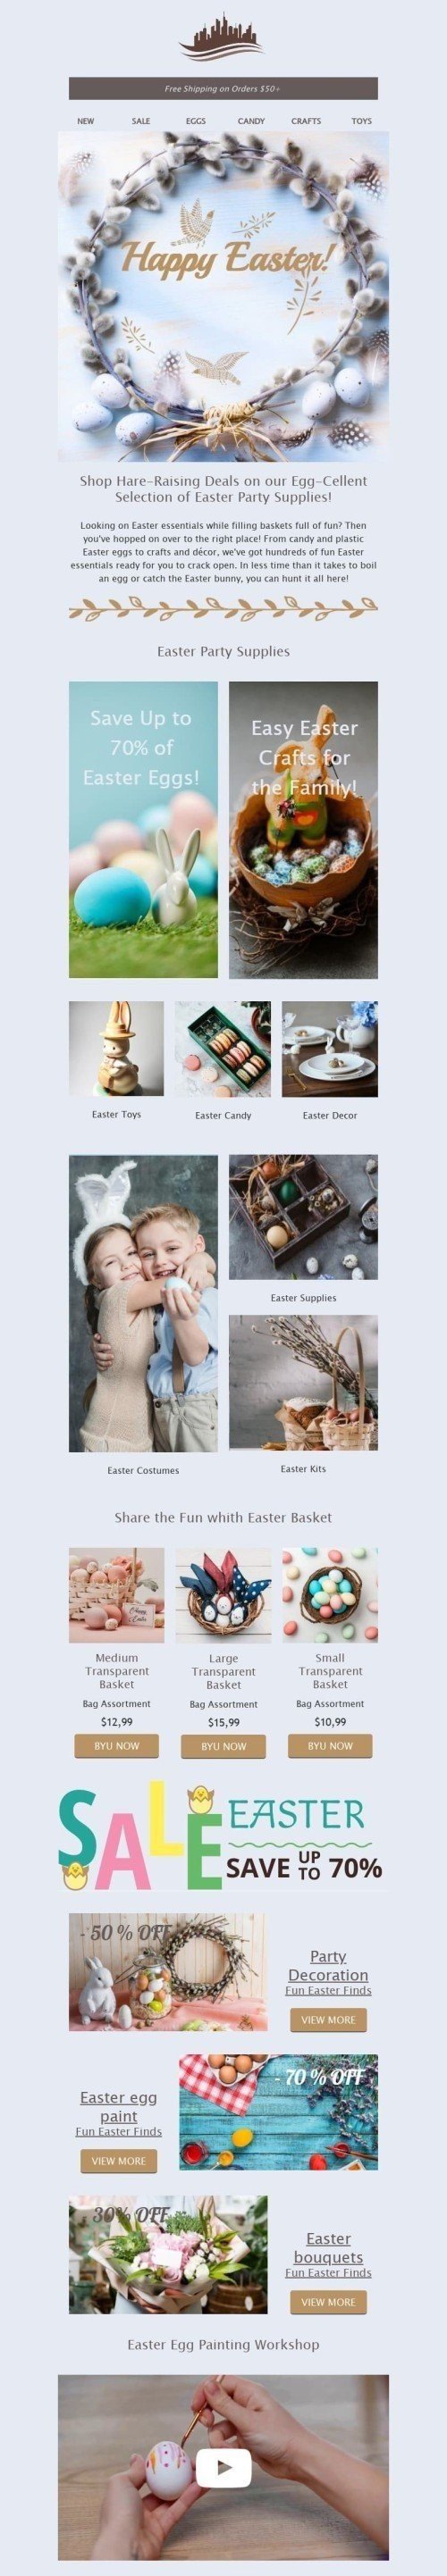 Easter Email Template «Easter Shop» for Food industry desktop view